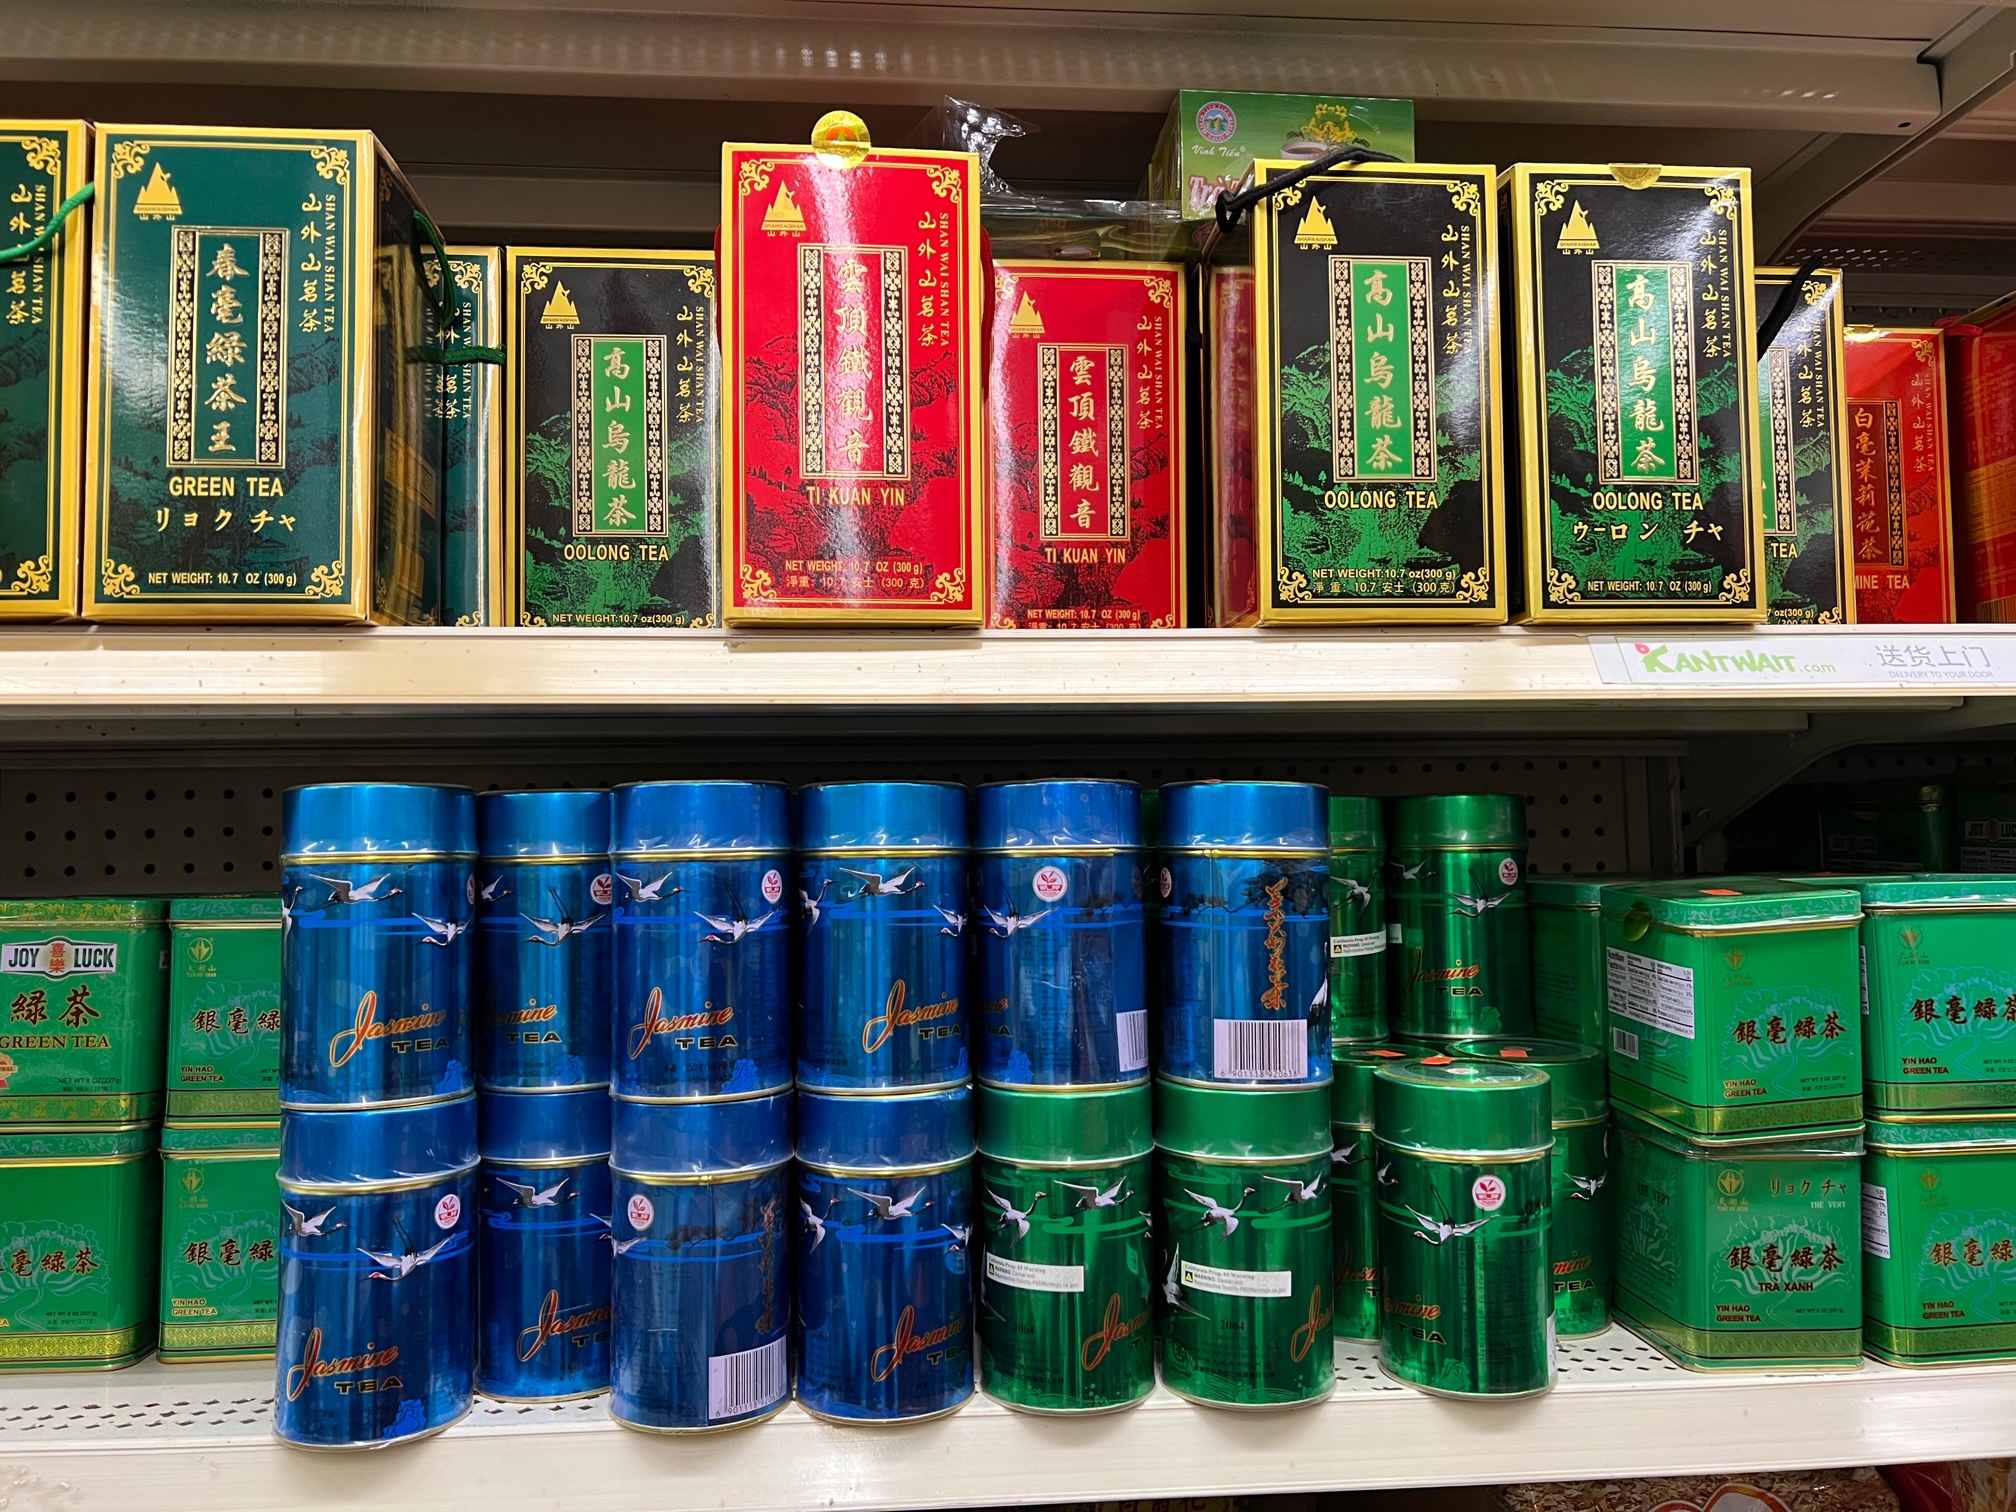 On the shelves at Far East Grocery, there are blue and green metallic canisters of green tea. Photo by Alyssa Buckley.